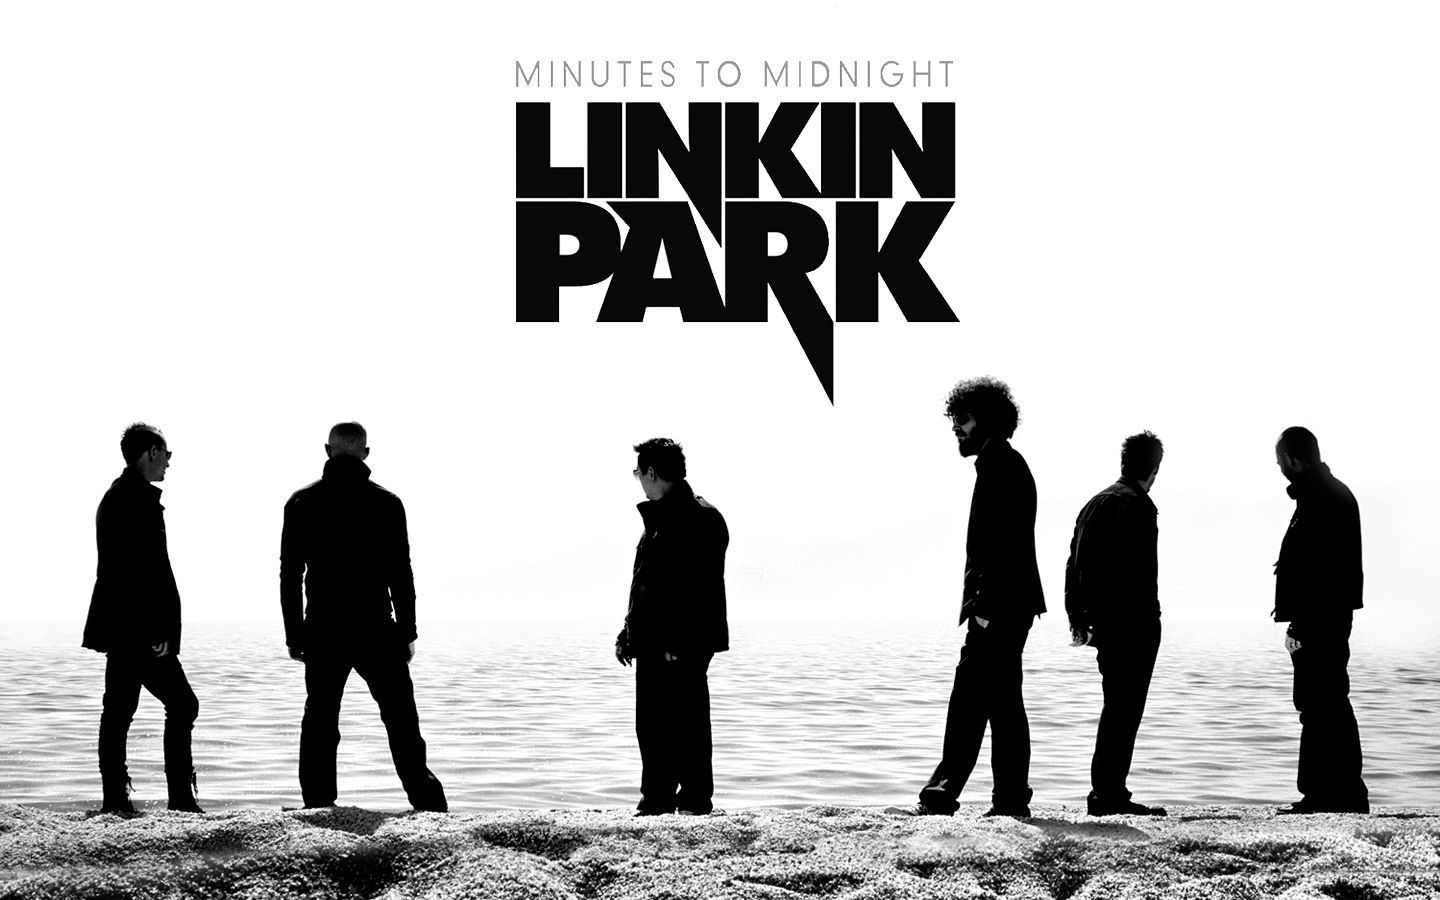 34 Linkin Park HD Wallpapers | Backgrounds - Wallpaper Abyss